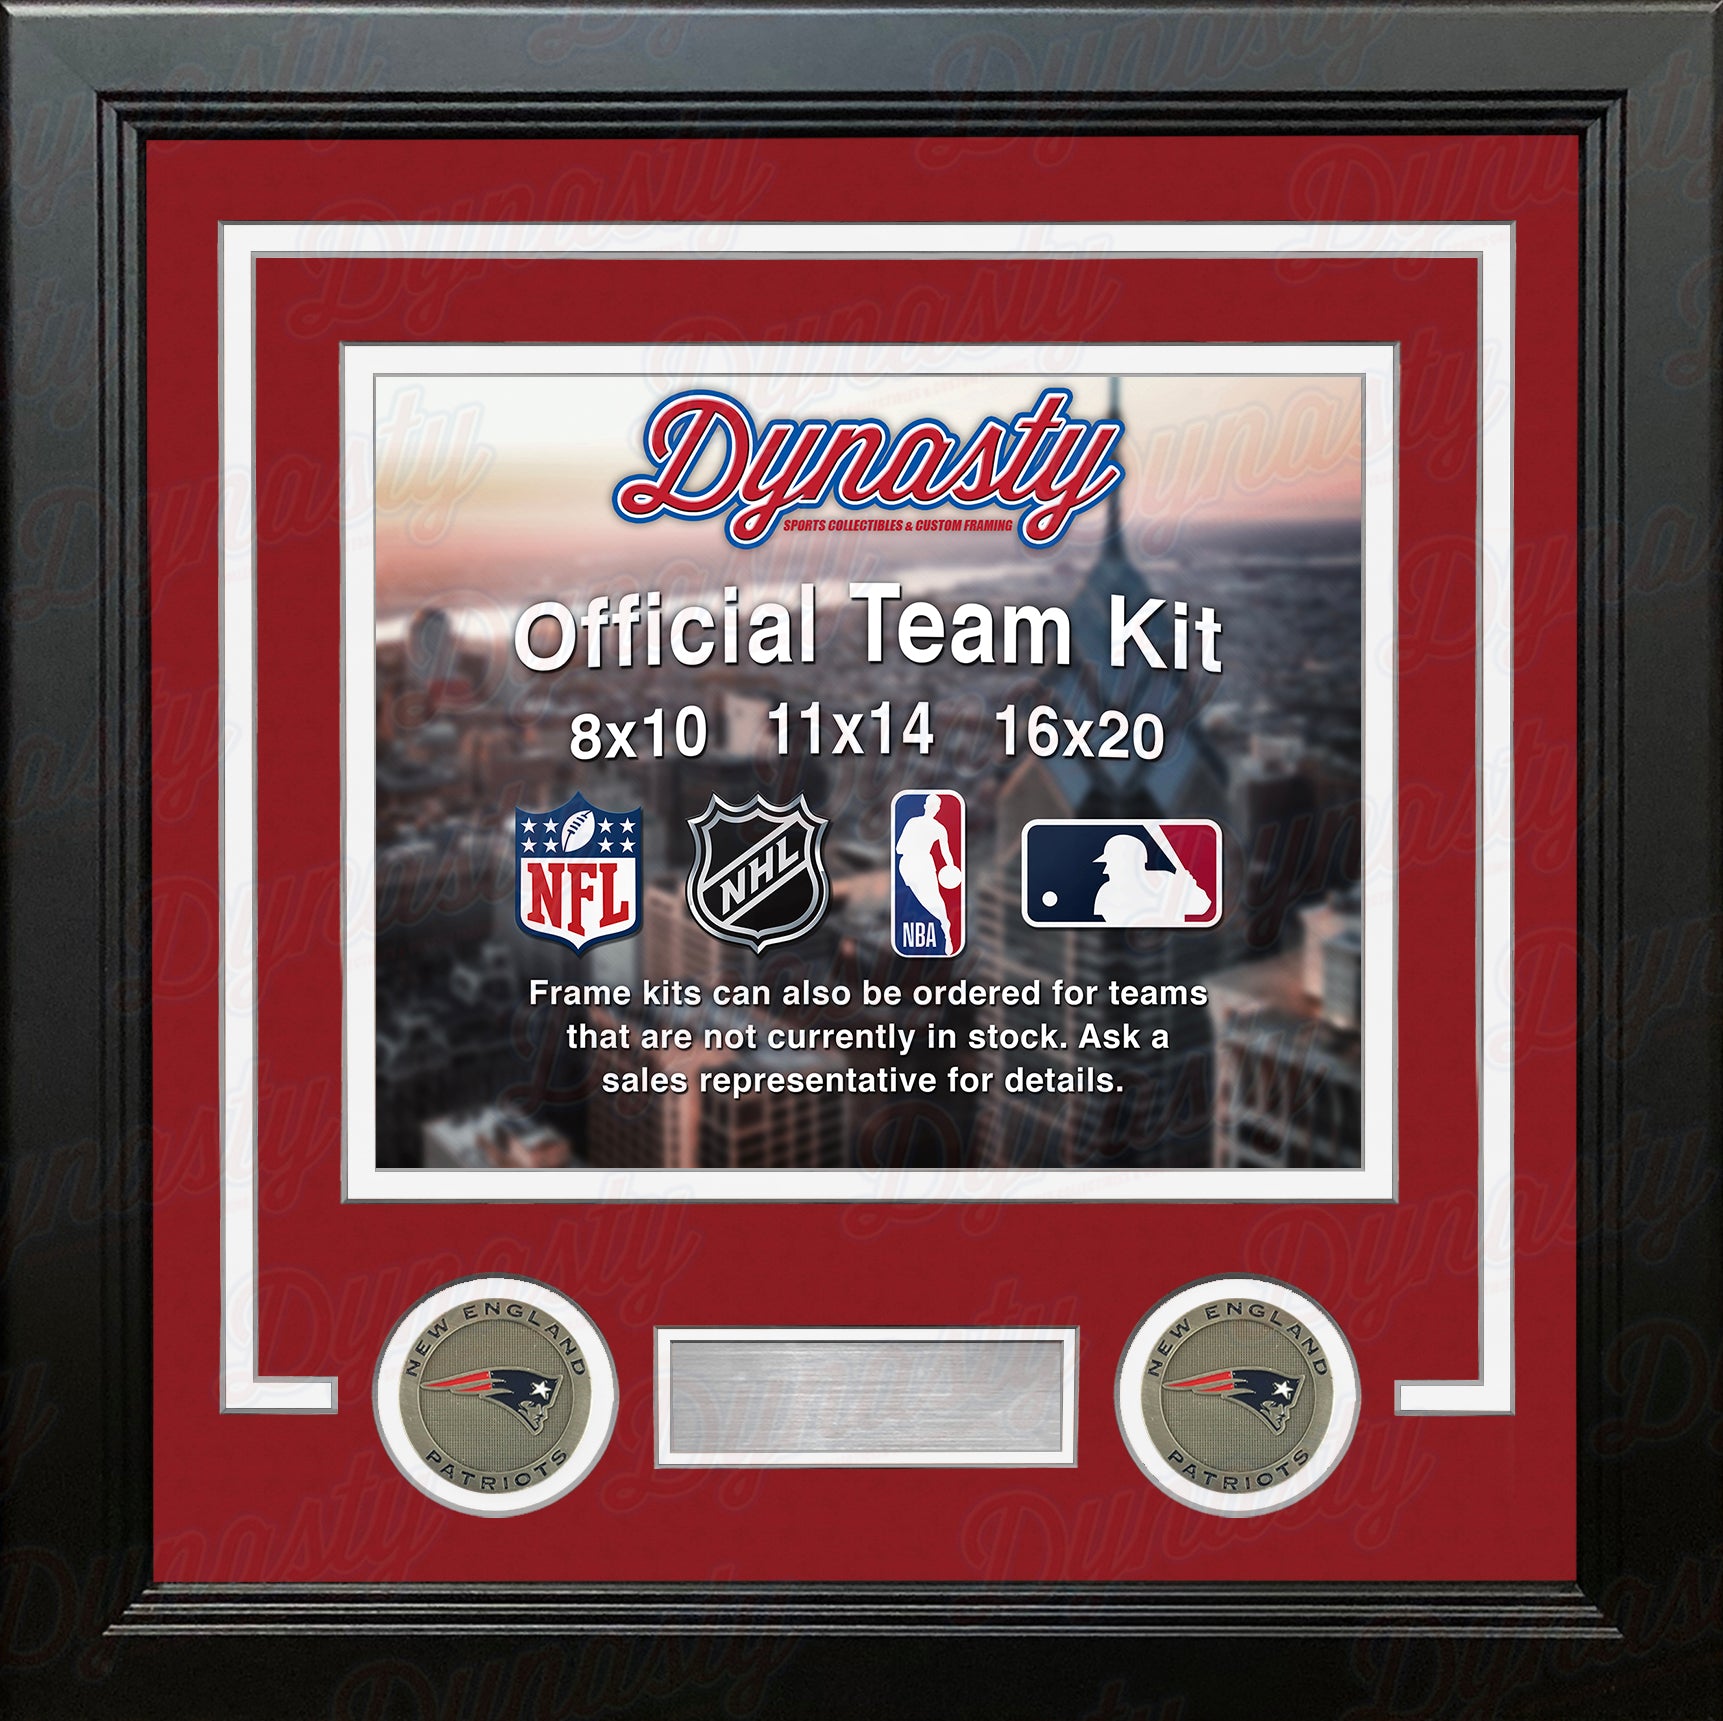 NFL Football Photo Picture Frame Kit - New England Patriots (Red Matting, White Trim) - Dynasty Sports & Framing 